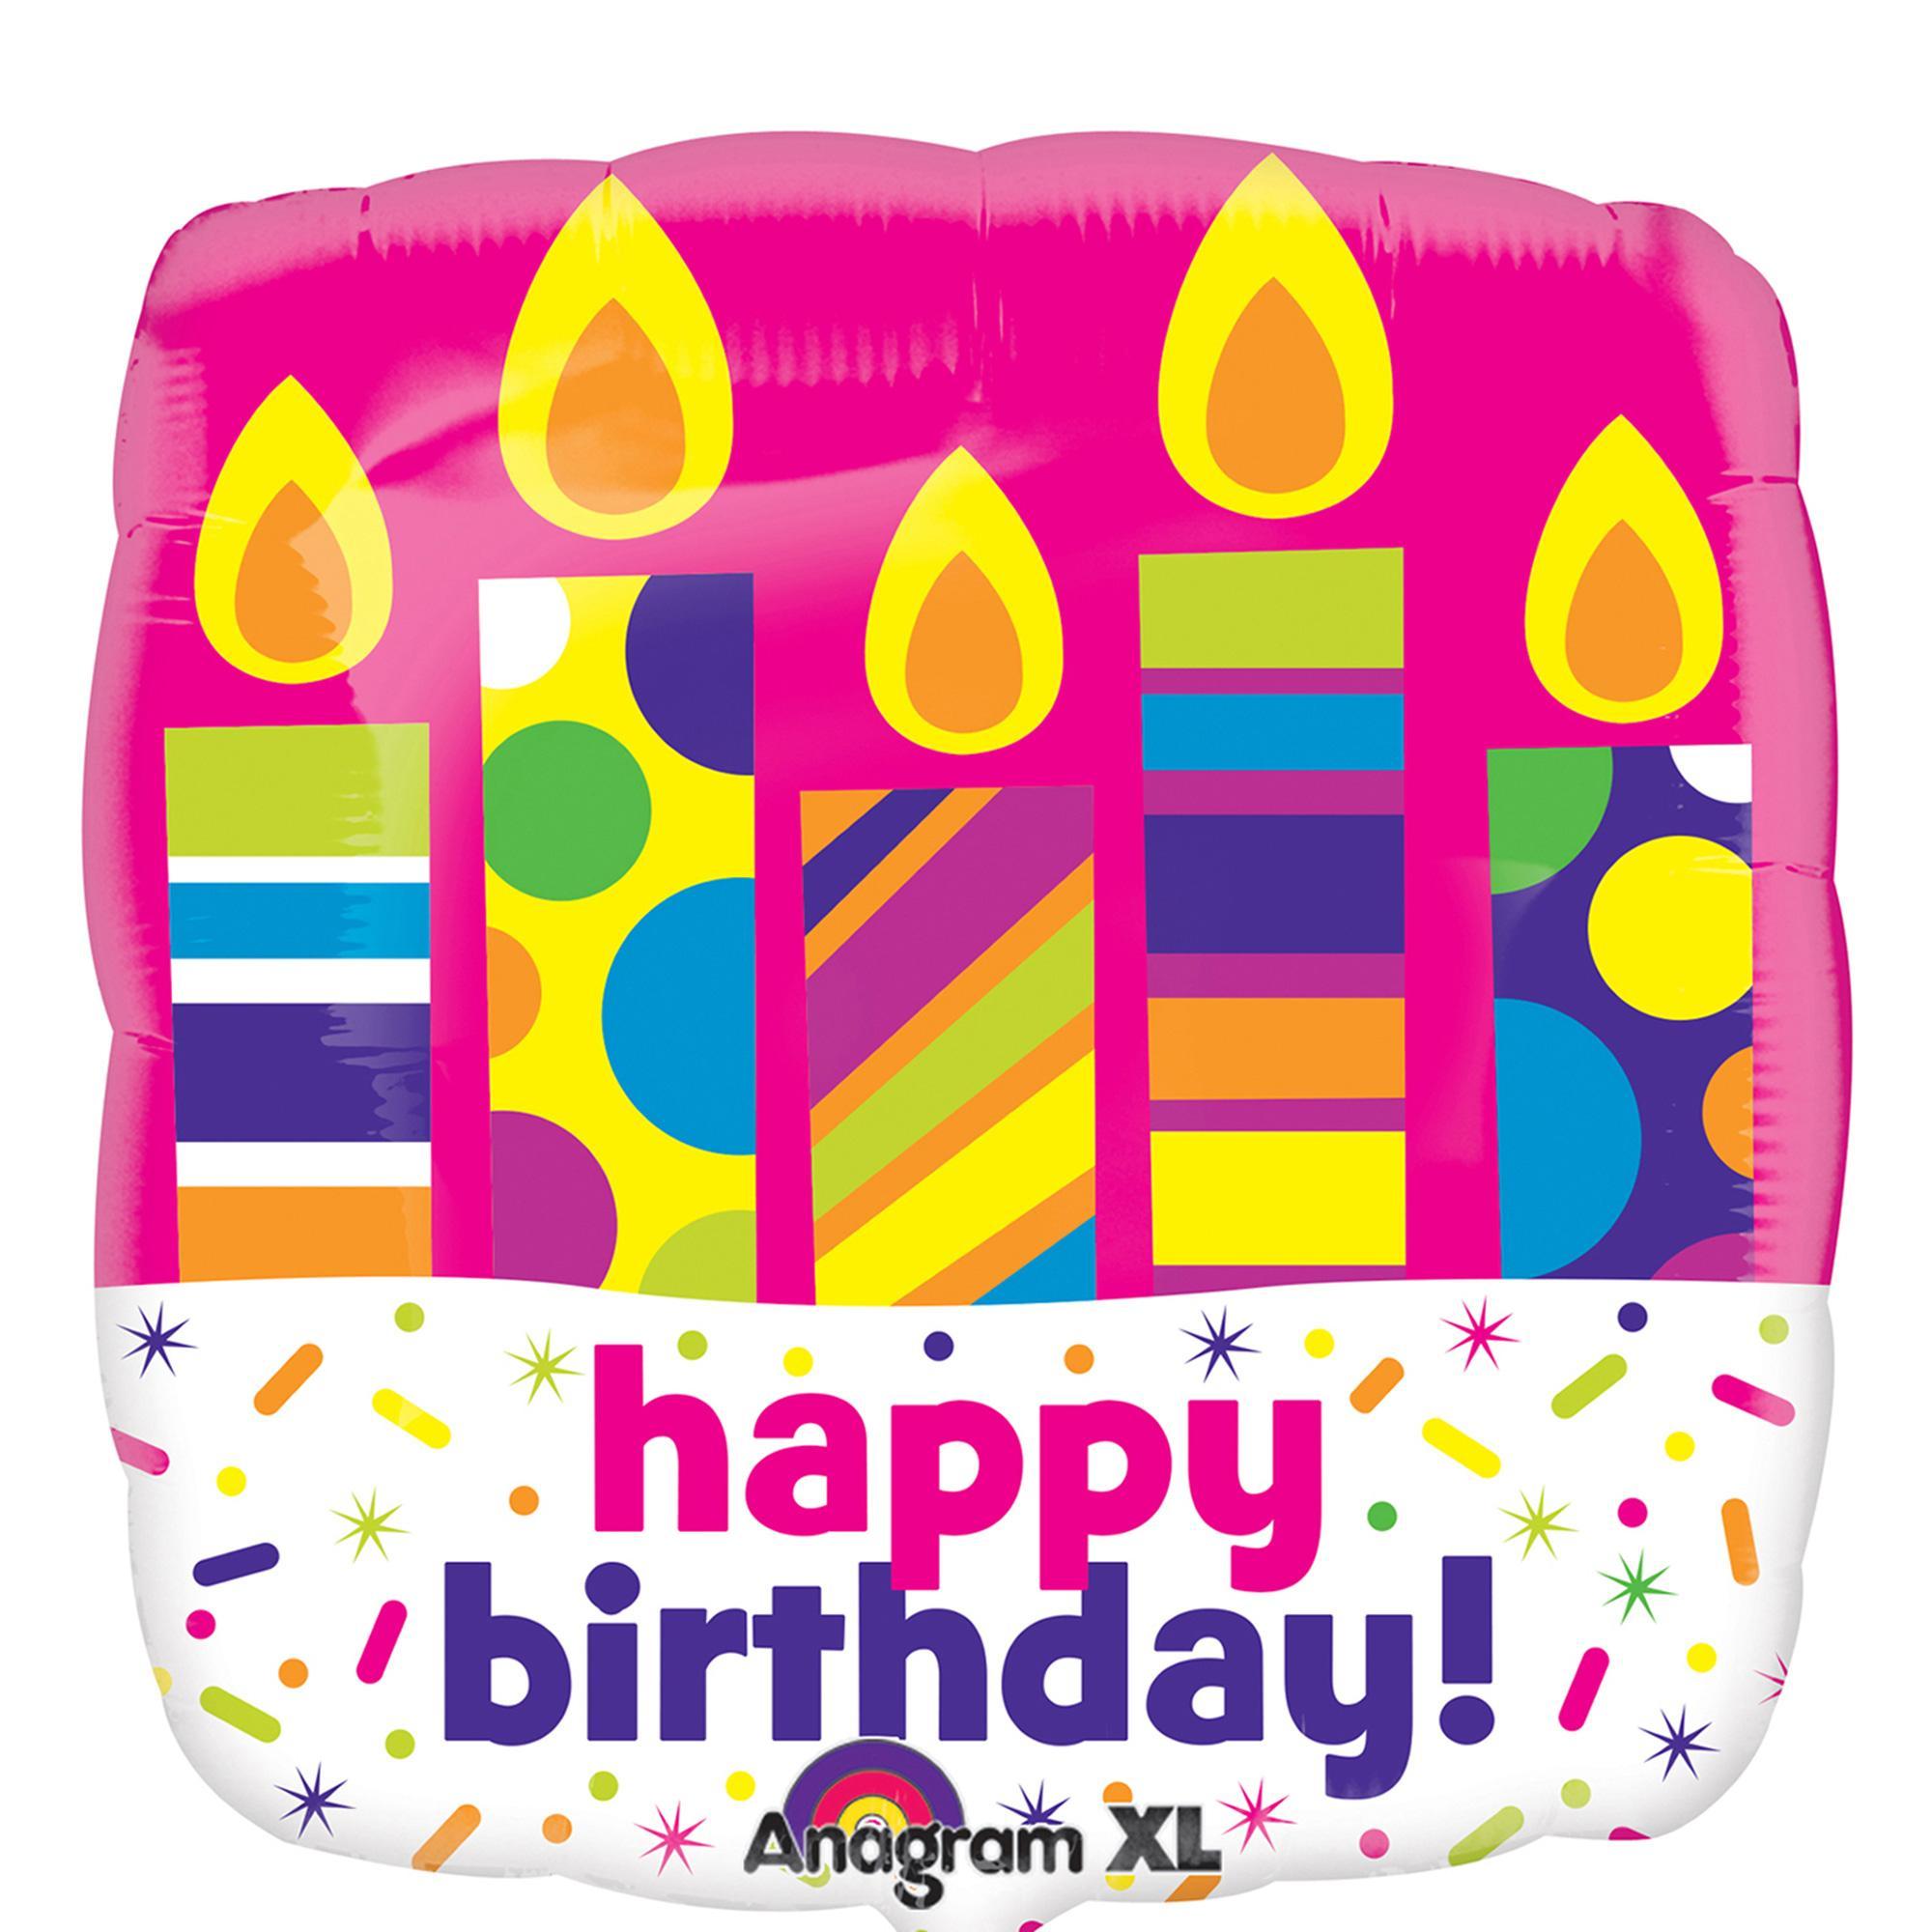 Happy Birthday Candle Blast Square Balloon 21in Balloons & Streamers - Party Centre - Party Centre